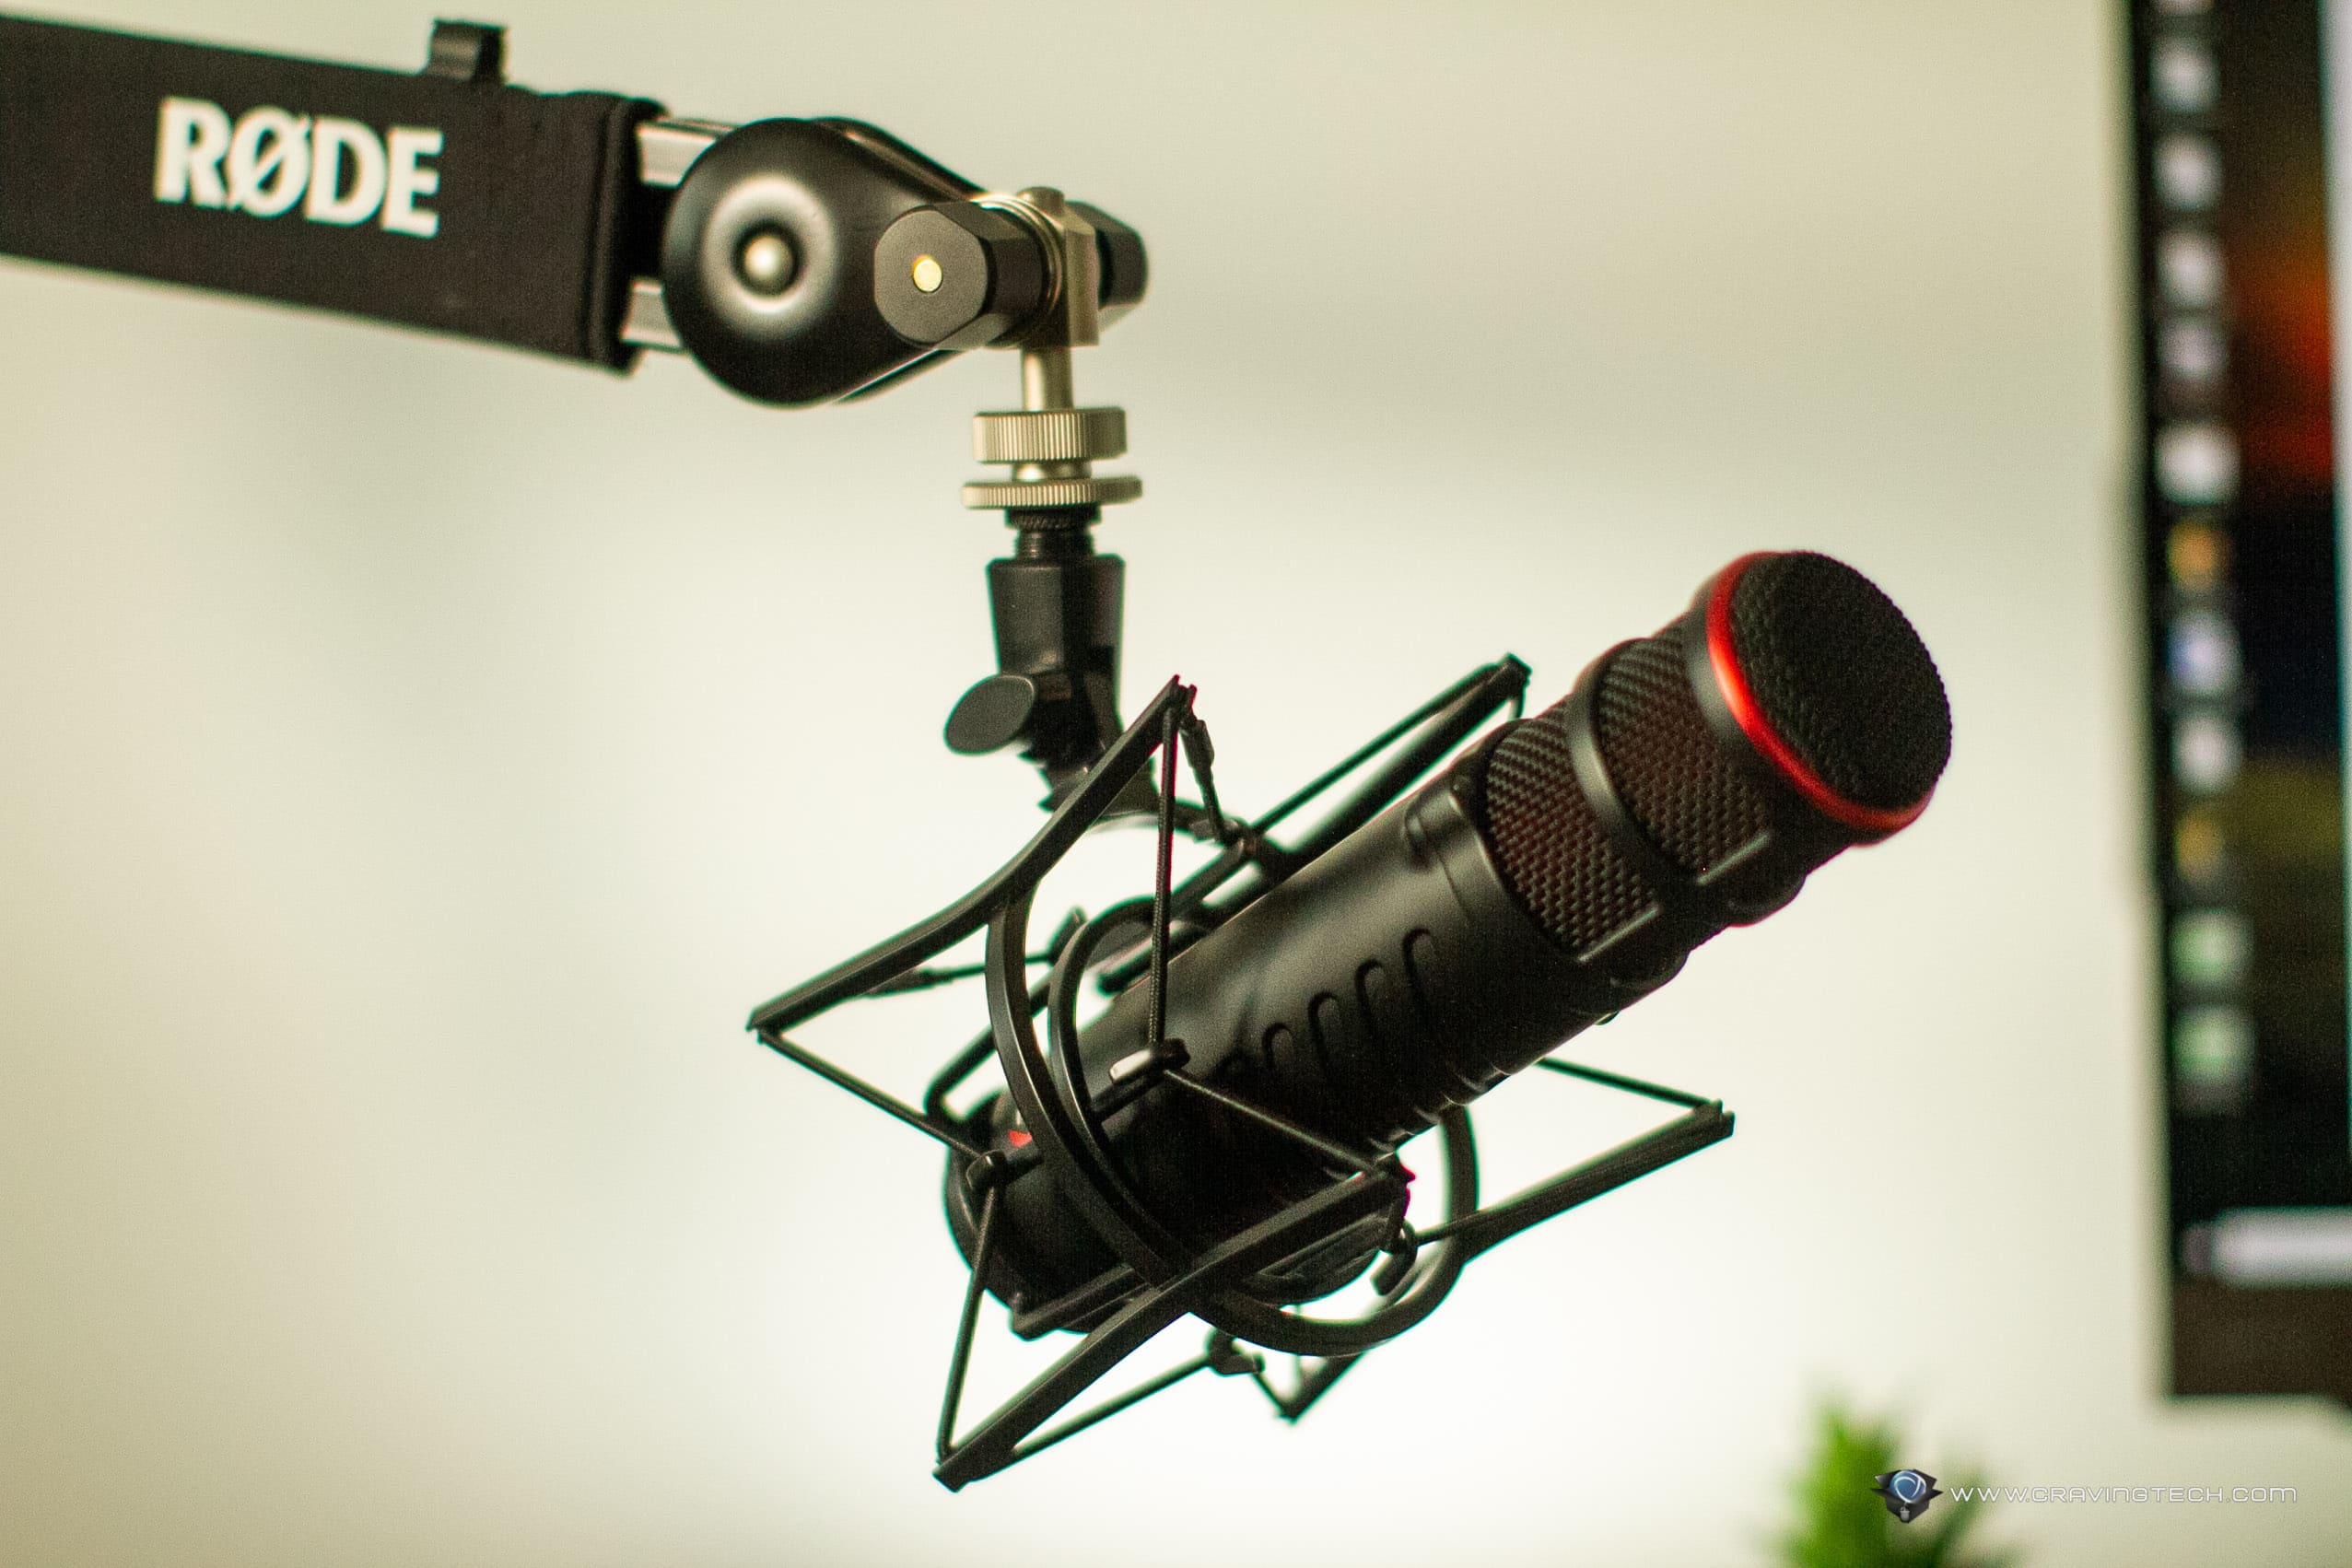 RODE X XDM-100 Review - The best microphone for streamers?